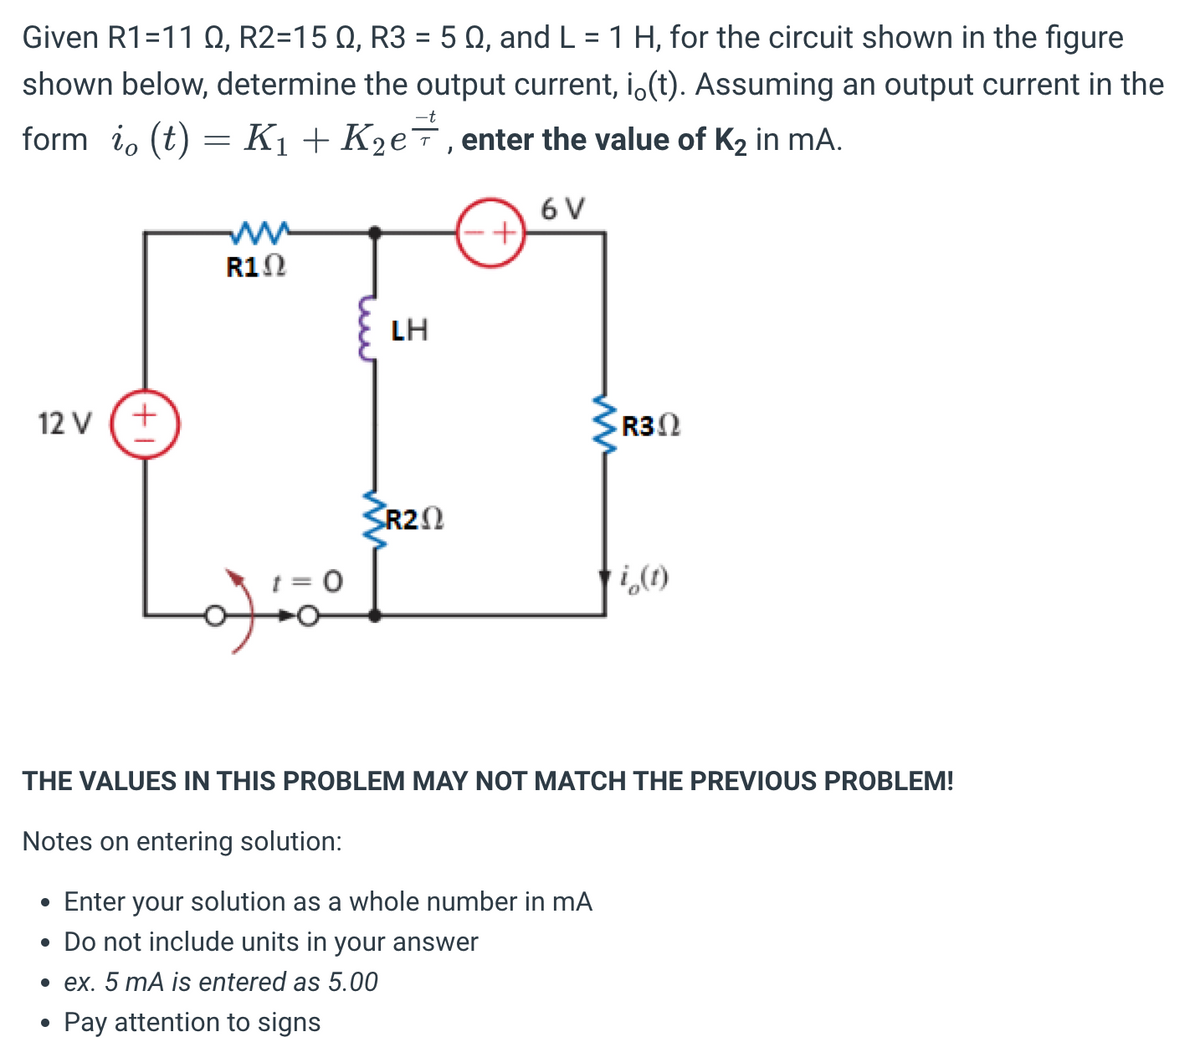 Given R1=11 Q, R2=15 Q, R3 = 50, and L = 1 H, for the circuit shown in the figure
shown below, determine the output current, i(t). Assuming an output current in the
form i, (t) = K₁ + K₂e, enter the value of K₂ in mA.
12 V
(+1)
●
R10
of
0
LH
SR20
+
6 V
R30
i(1)
THE VALUES IN THIS PROBLEM MAY NOT MATCH THE PREVIOUS PROBLEM!
Notes on entering solution:
• Enter your solution as a whole number in mA
• Do not include units in your answer
• ex. 5 mA is entered as 5.00
Pay attention to signs